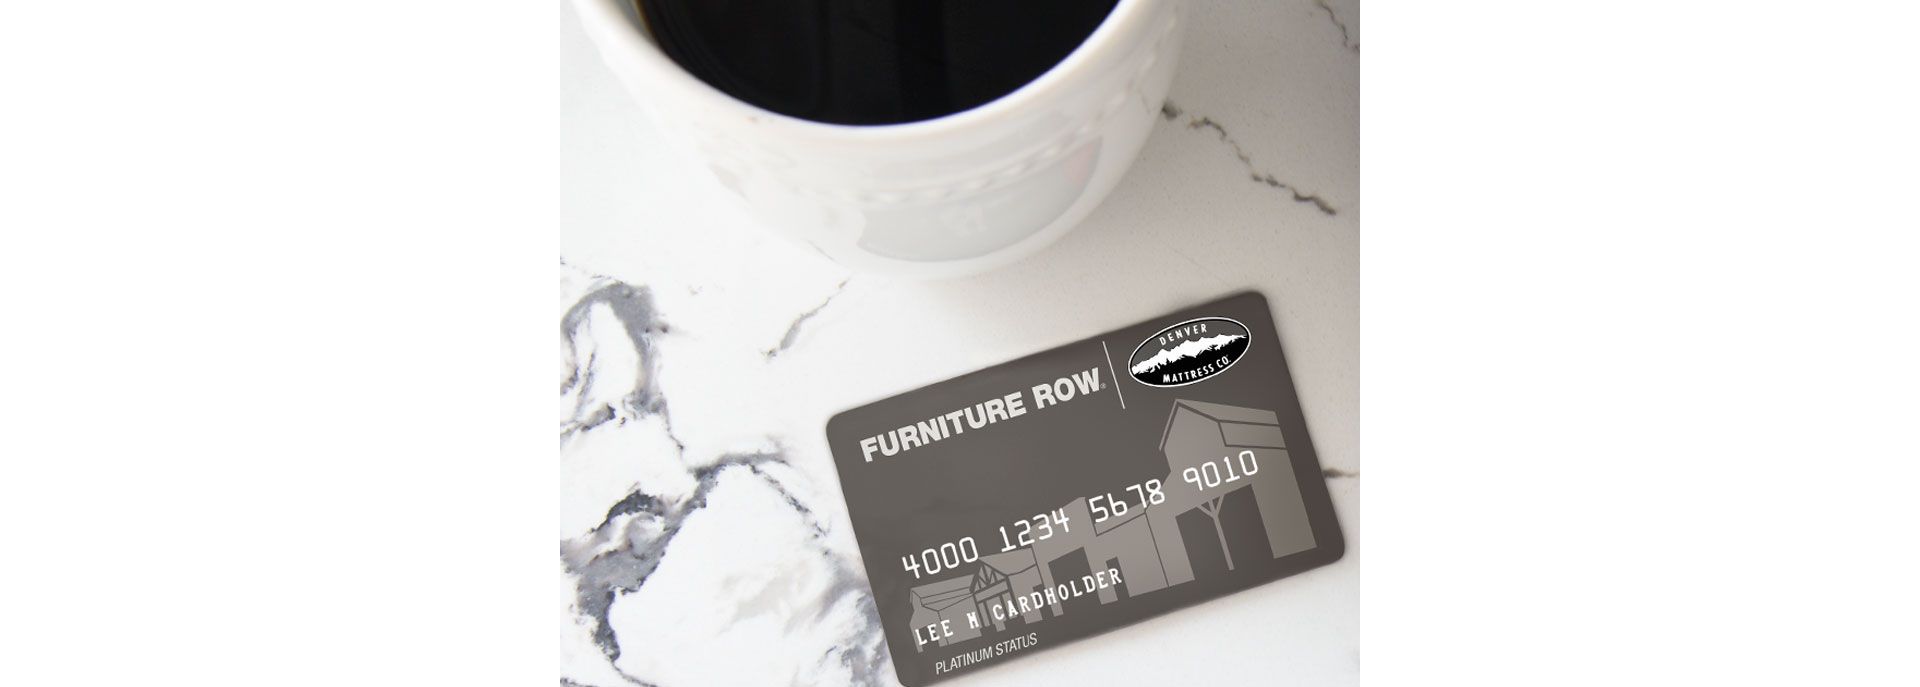 Furniture Row Credit Card Next to computer with coffee cup